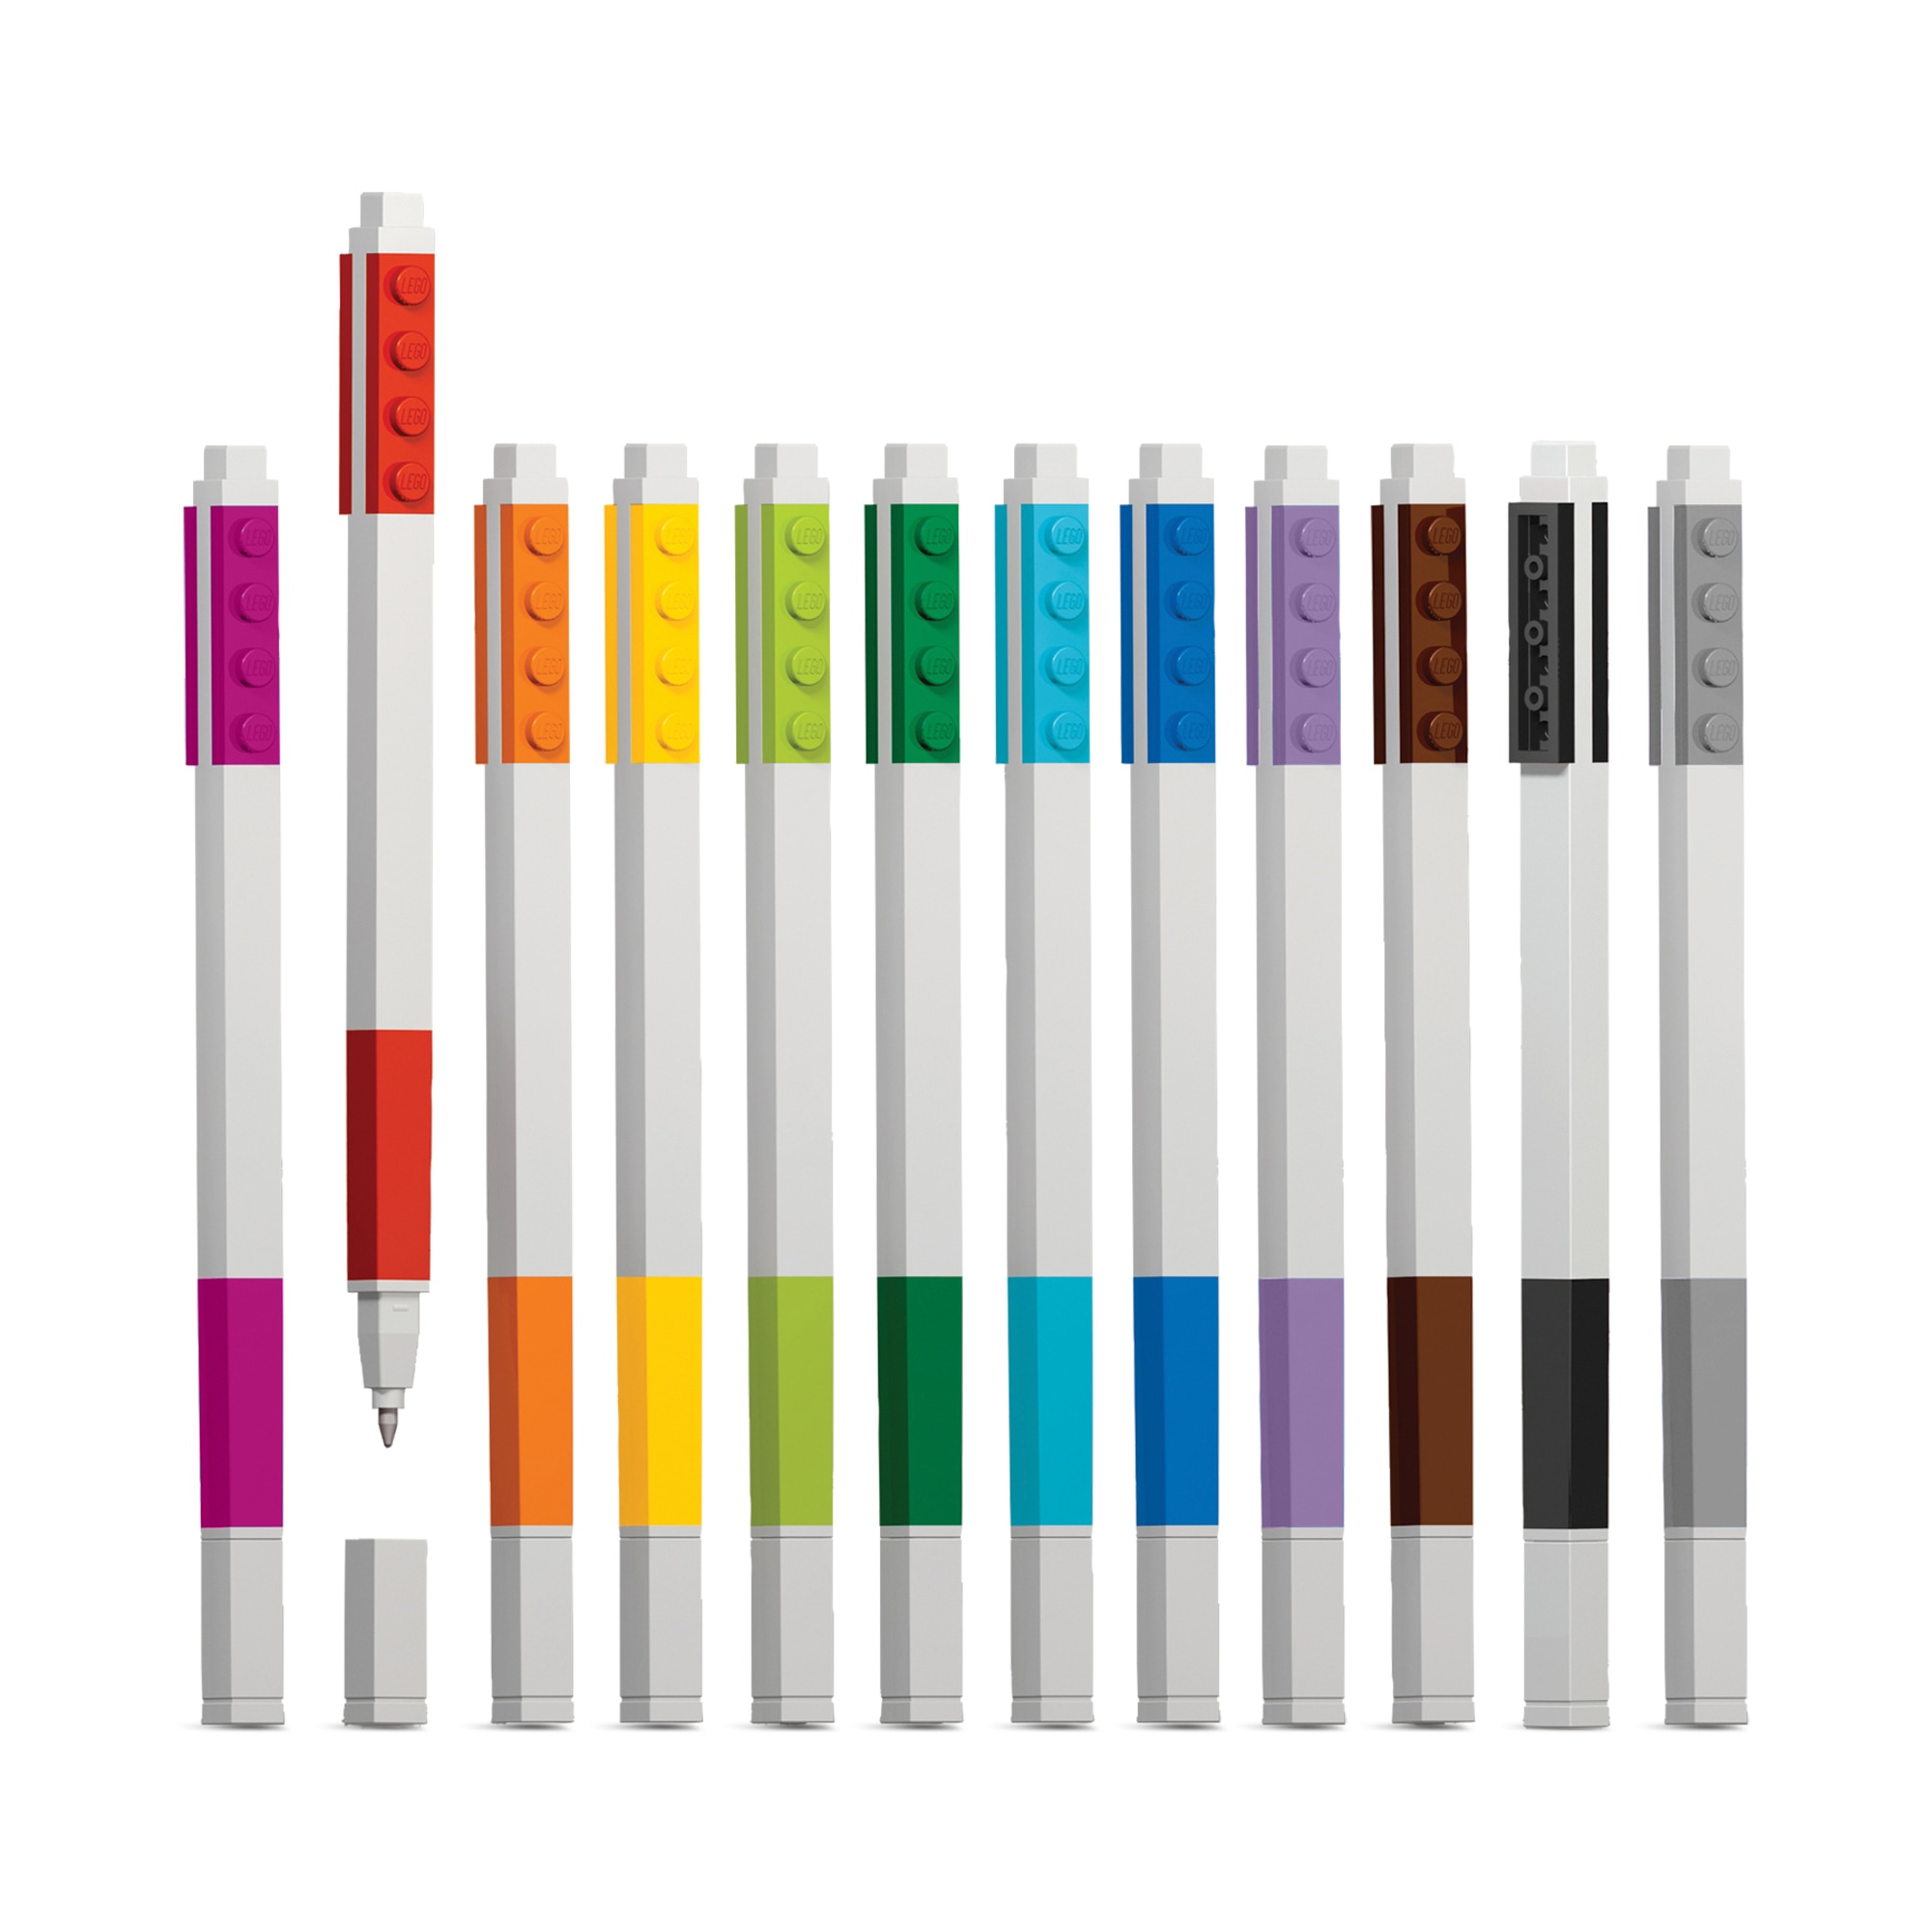 LEGO 12 Pack Gel Pens, Ages 6 to Adult - image 2 of 6